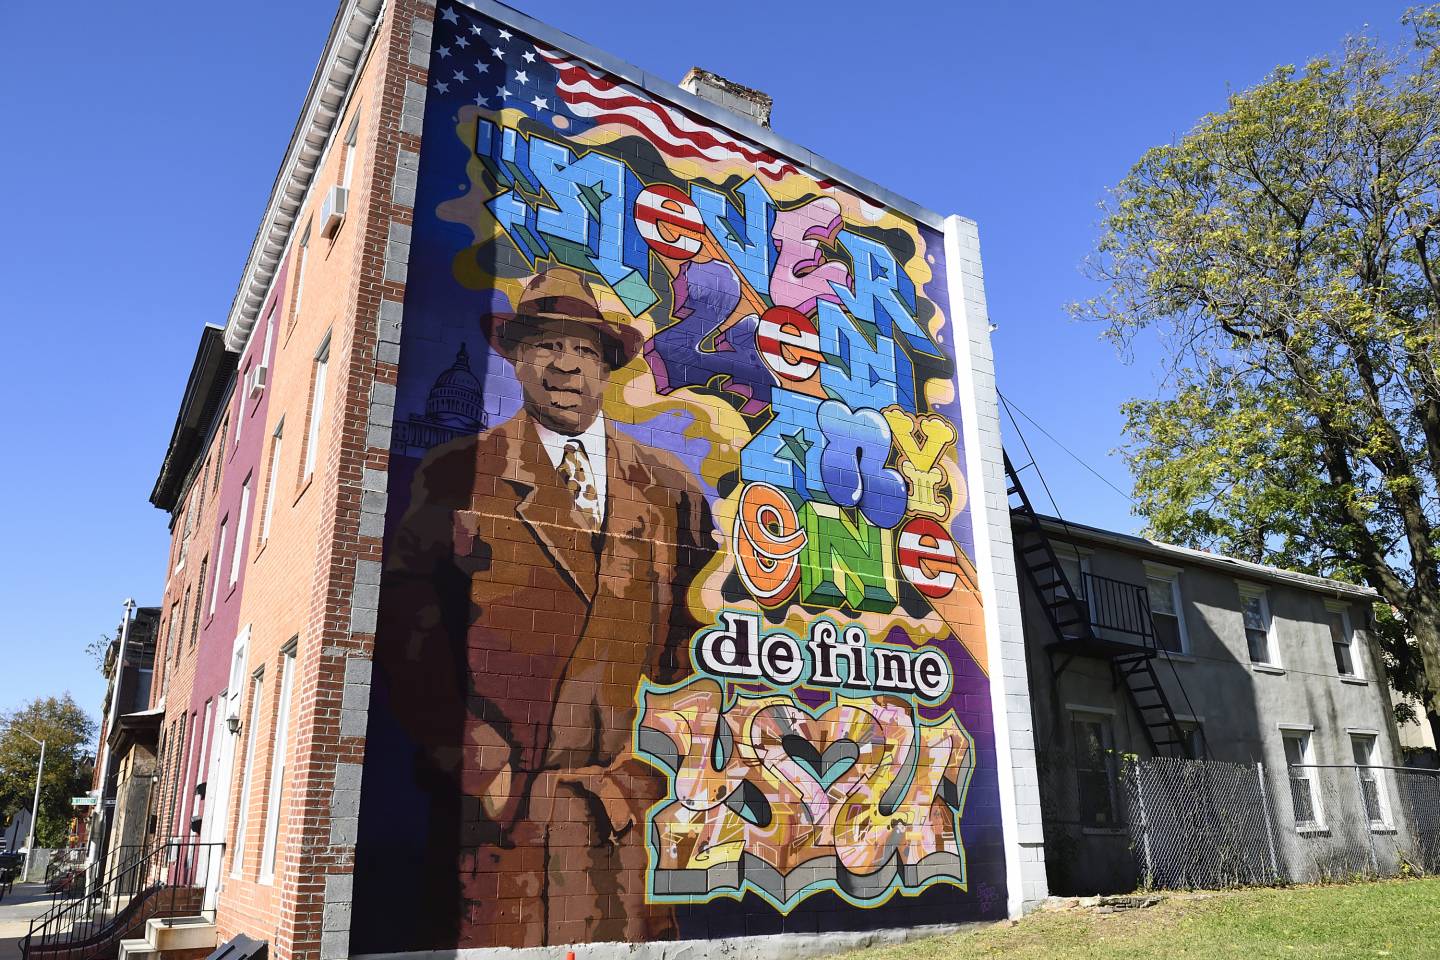 Mural on the side of a row home depicts U.S. Rep. Elijah E. Cummings